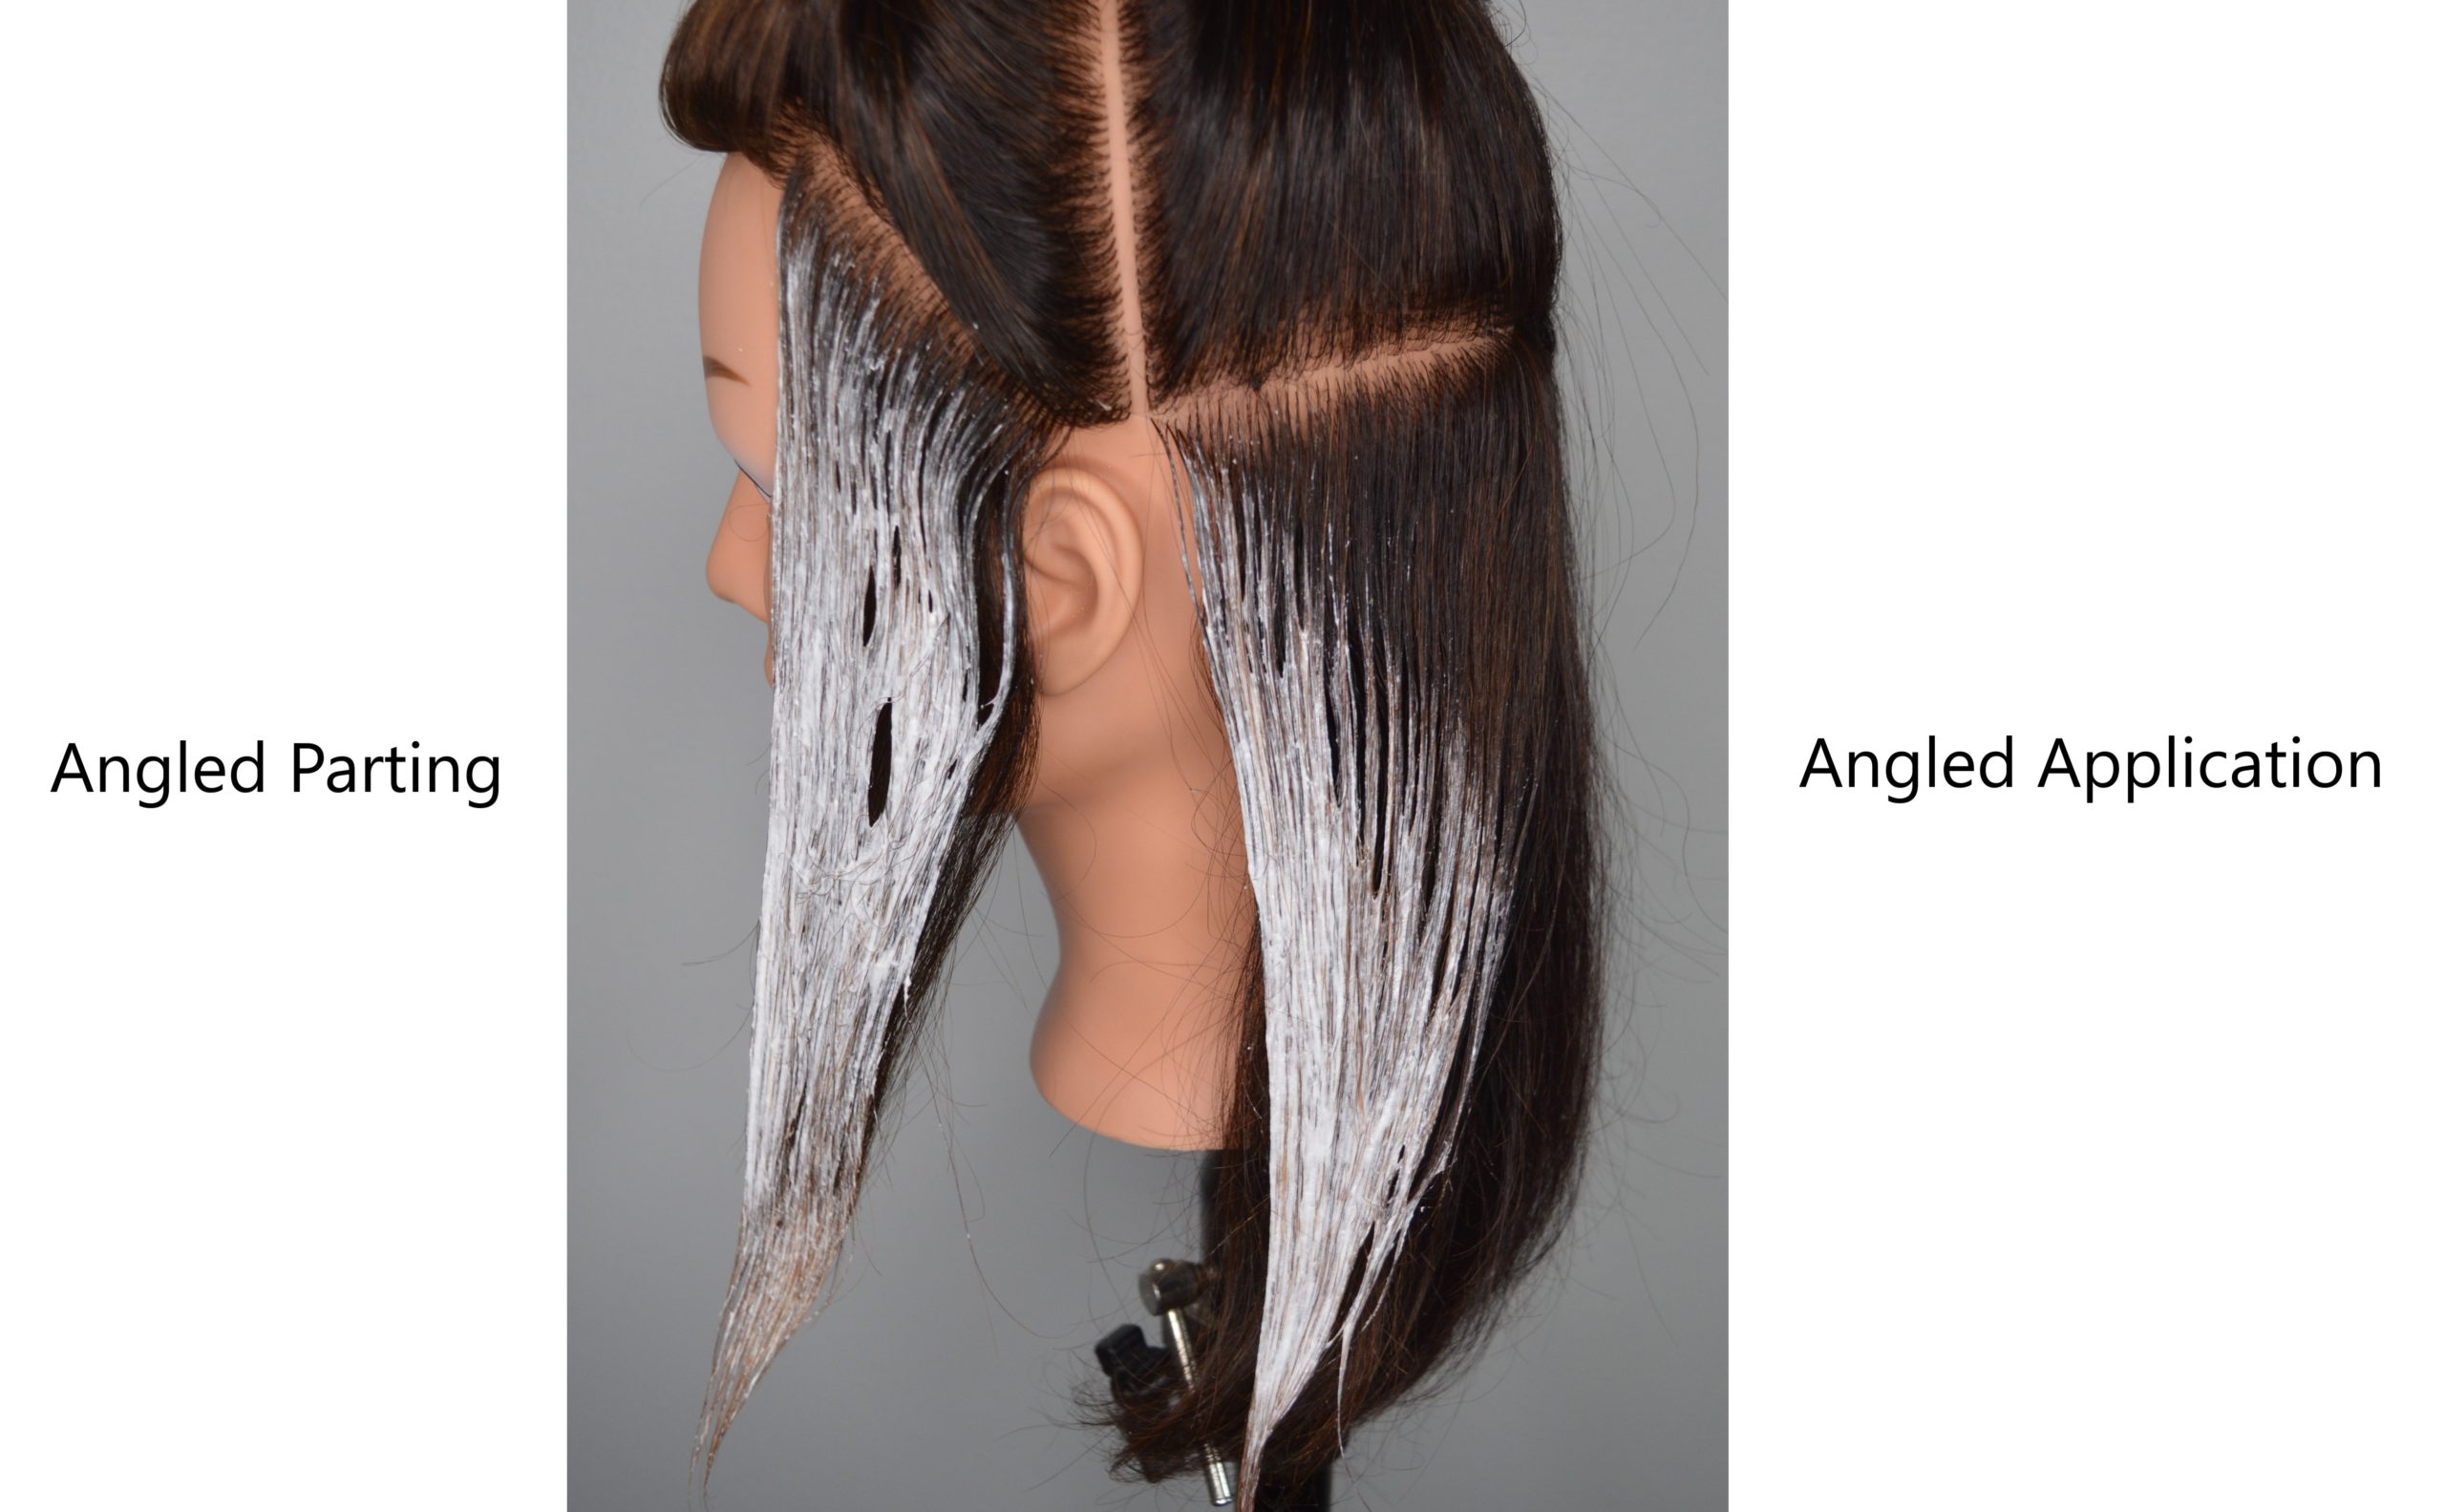 Two sections of hair. One is parted on an angle and the other shows an angled application.